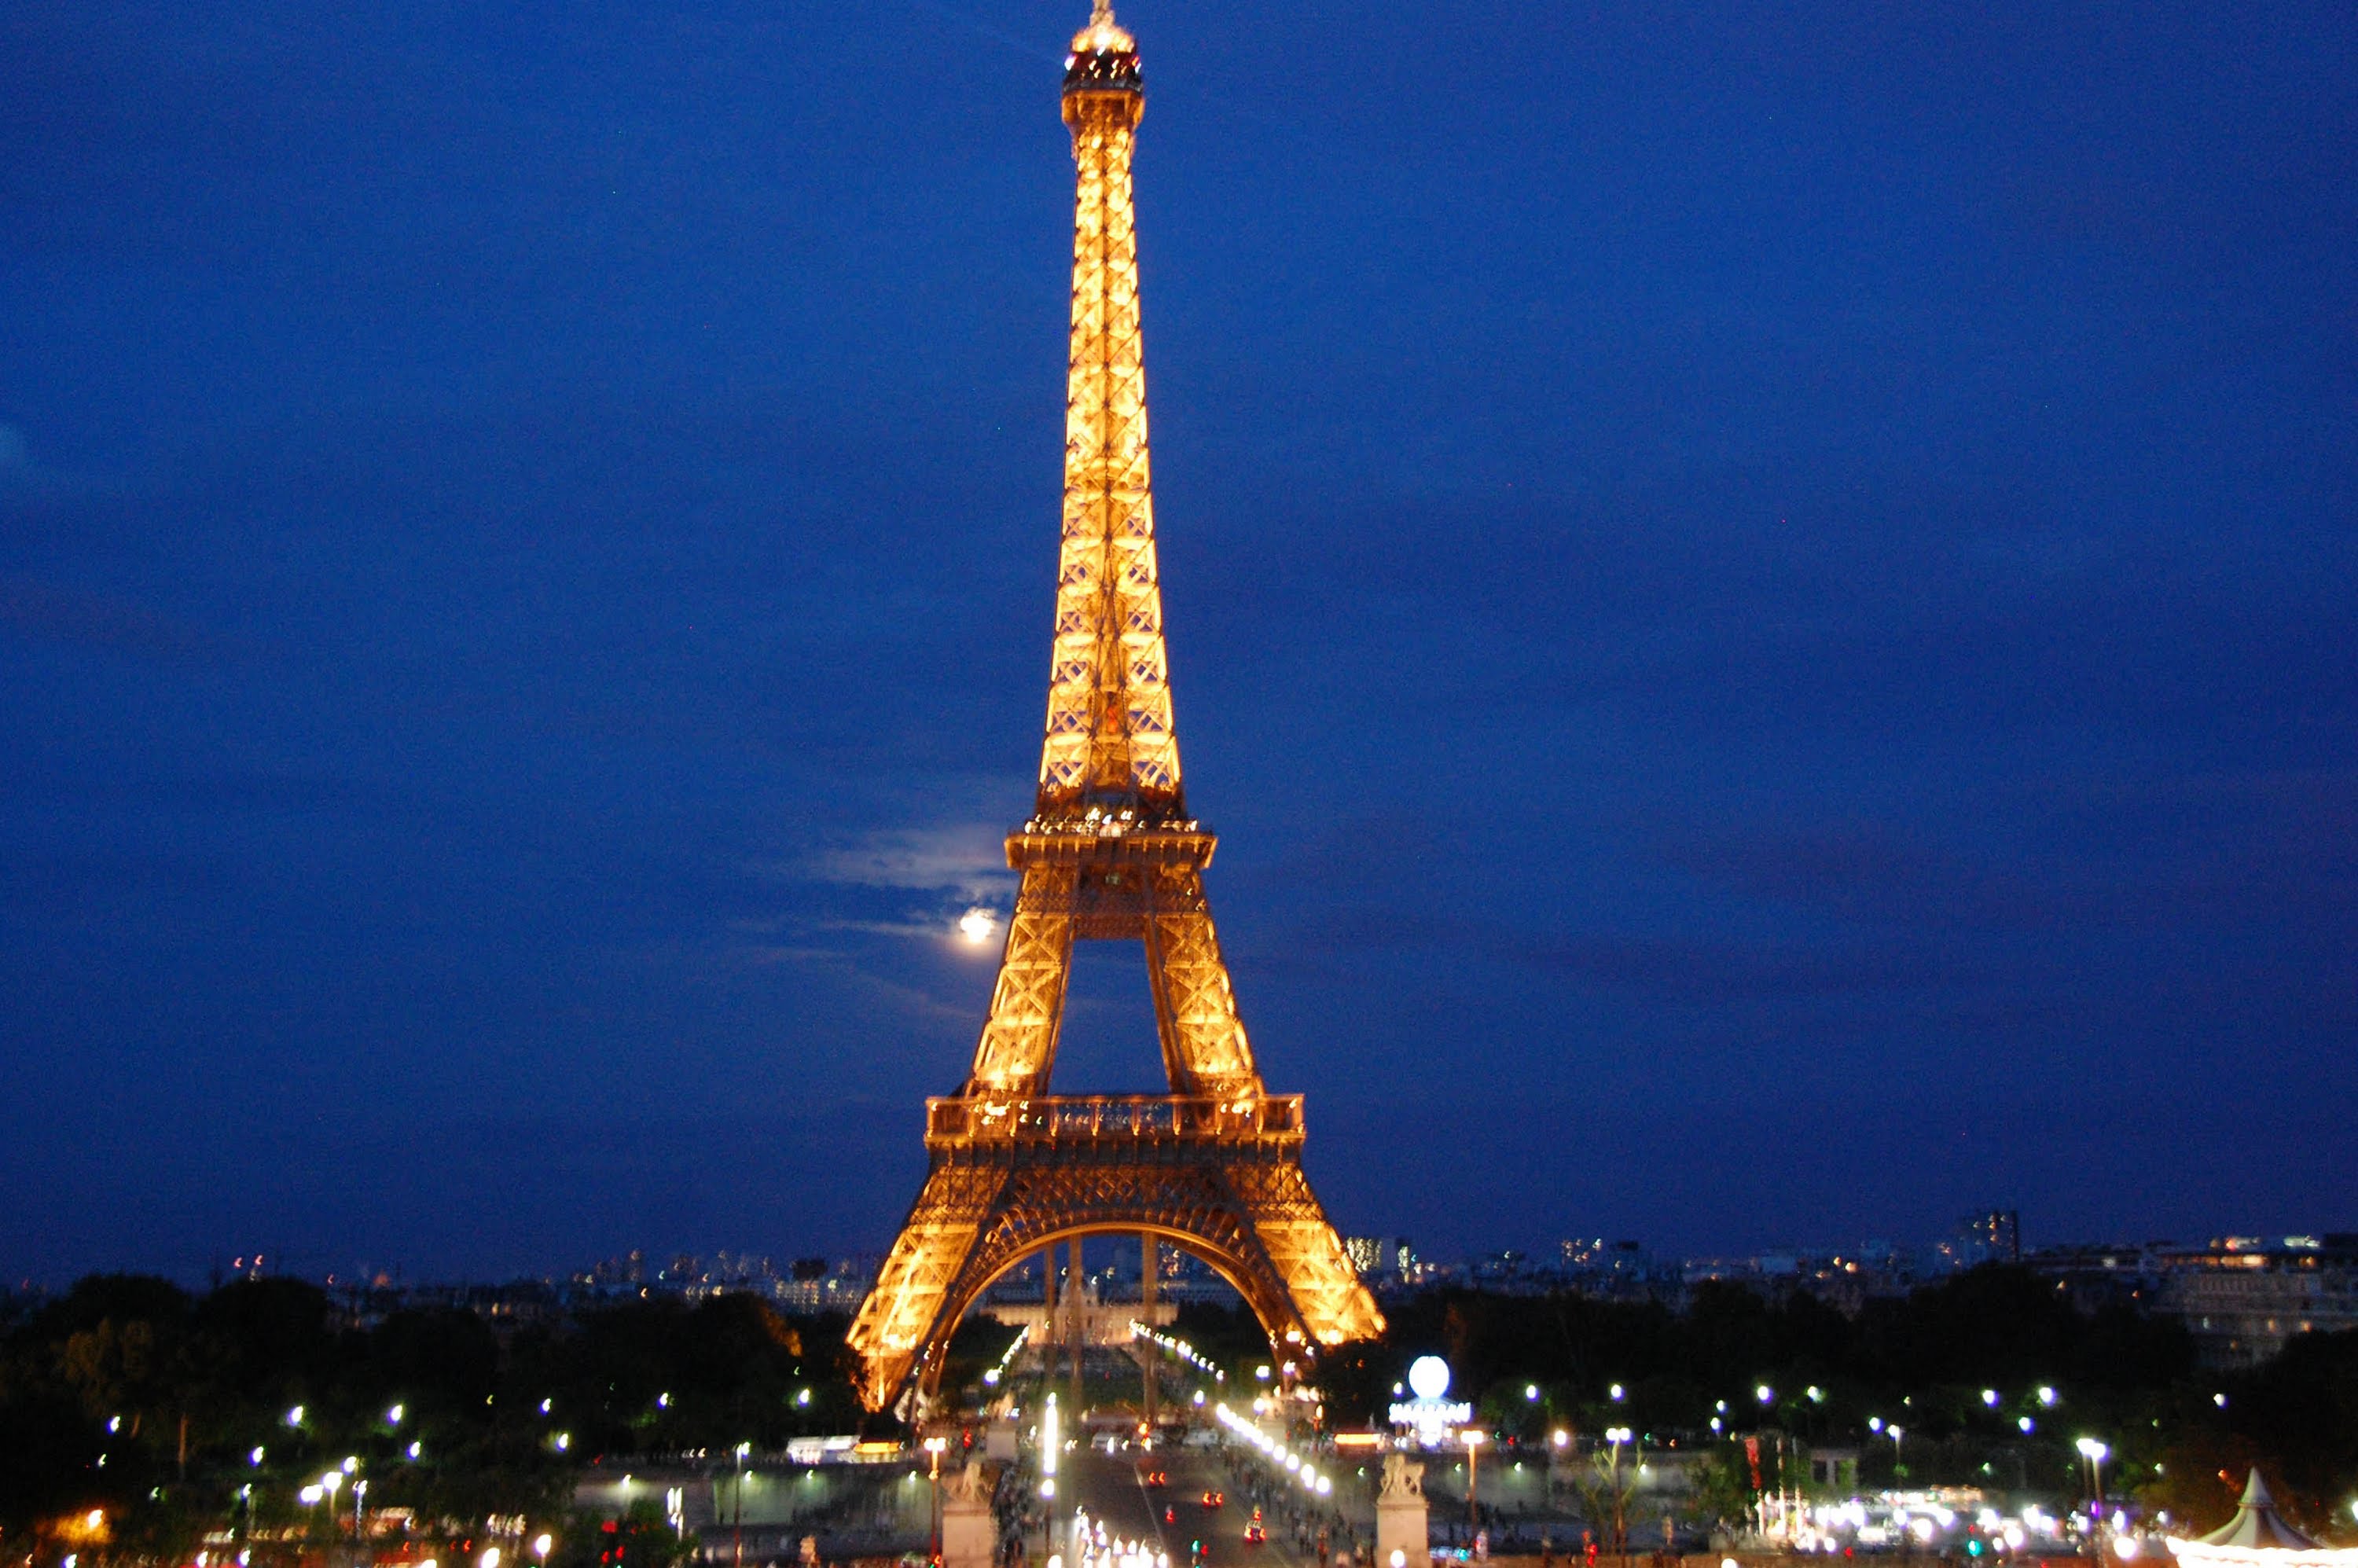 The Eiffel Tower at night - YouTube